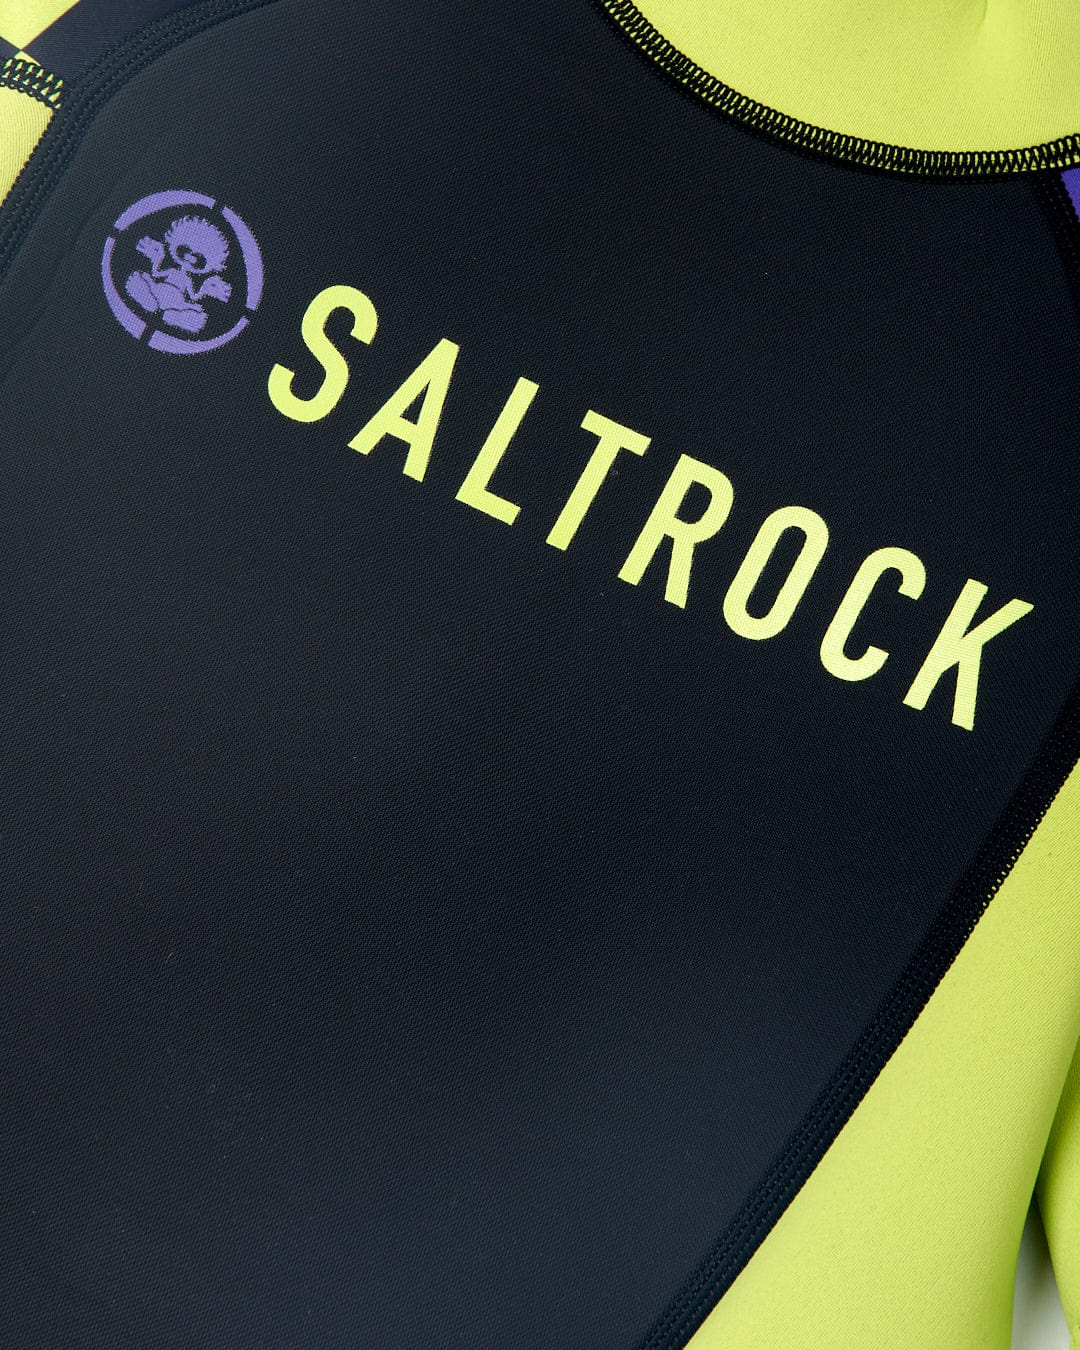 Close-up of a black and neon yellow Warped - Kids 3/2 Back Zip Wetsuit by Saltrock with the brand name and logo visible.